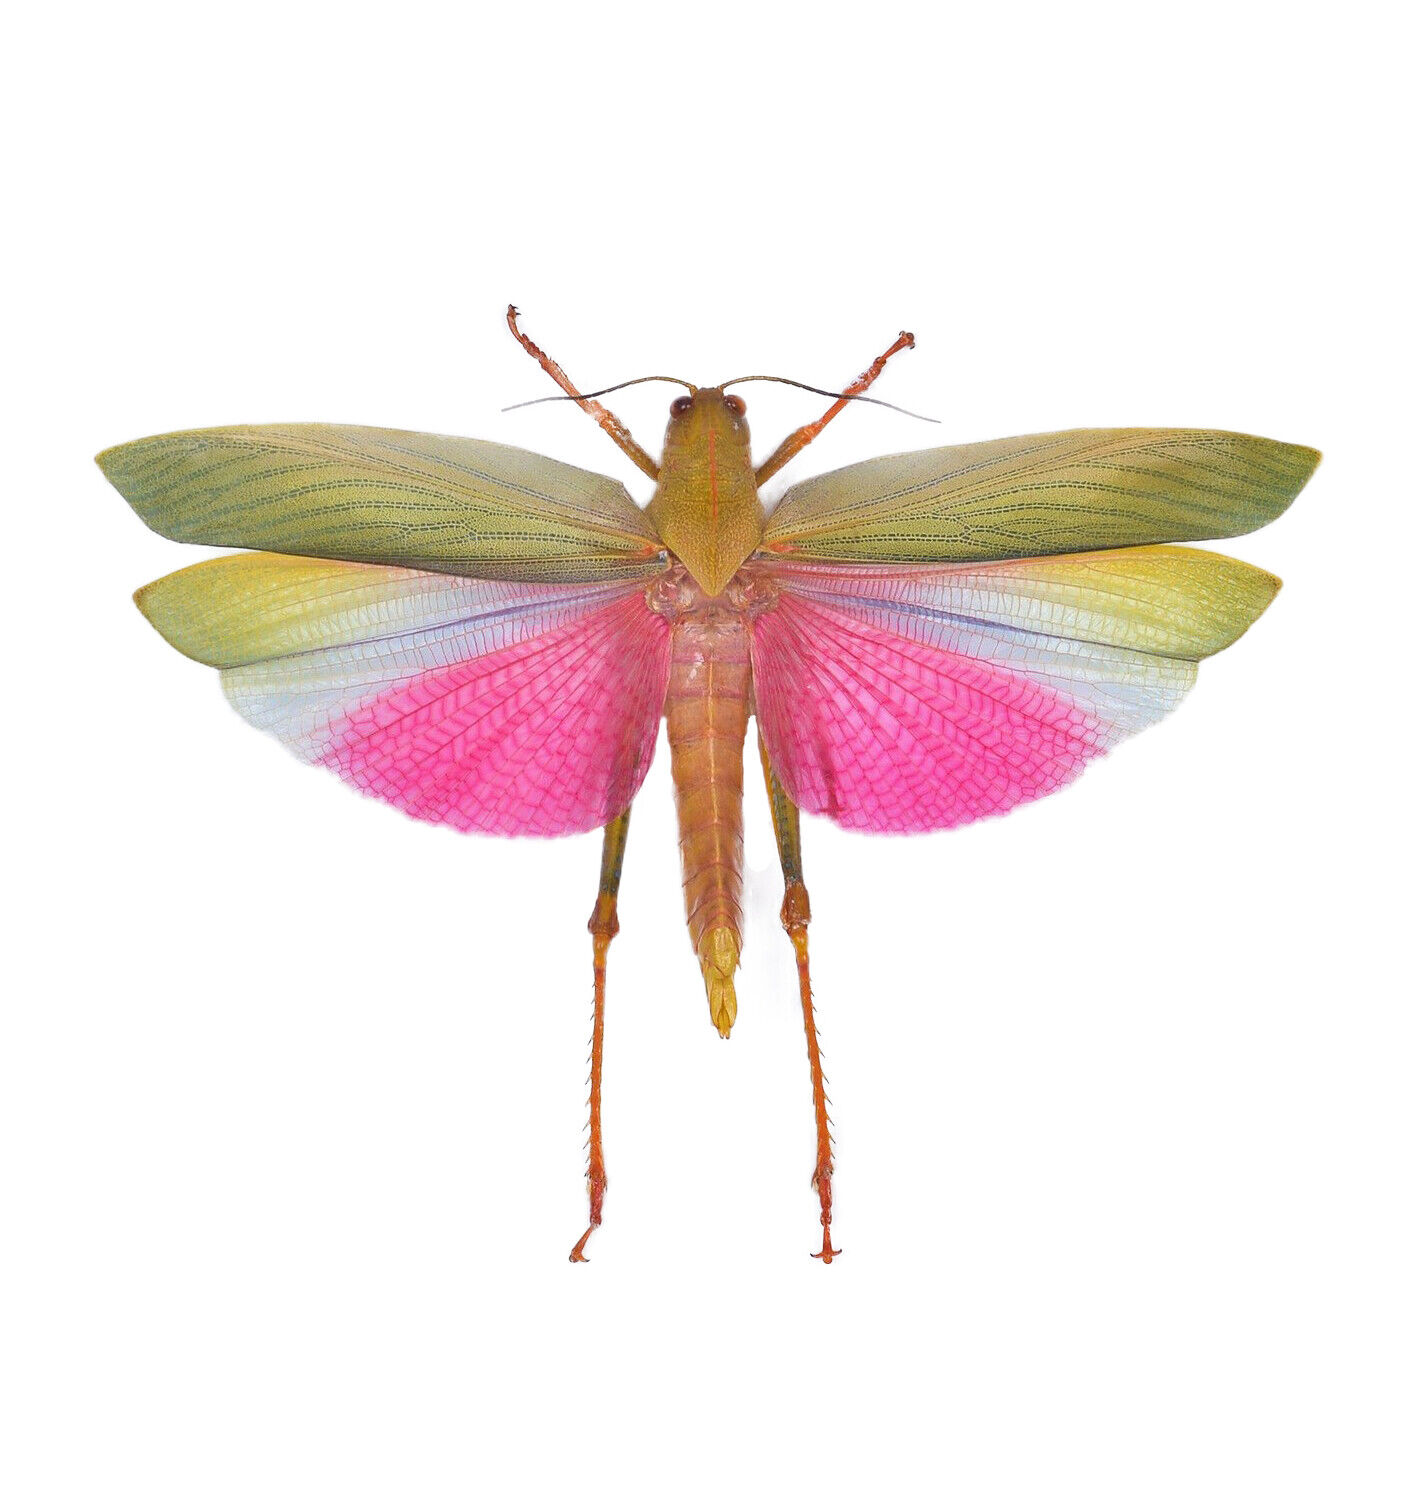 Lophacris cristata real pink grasshopper unmounted wings closed Peru